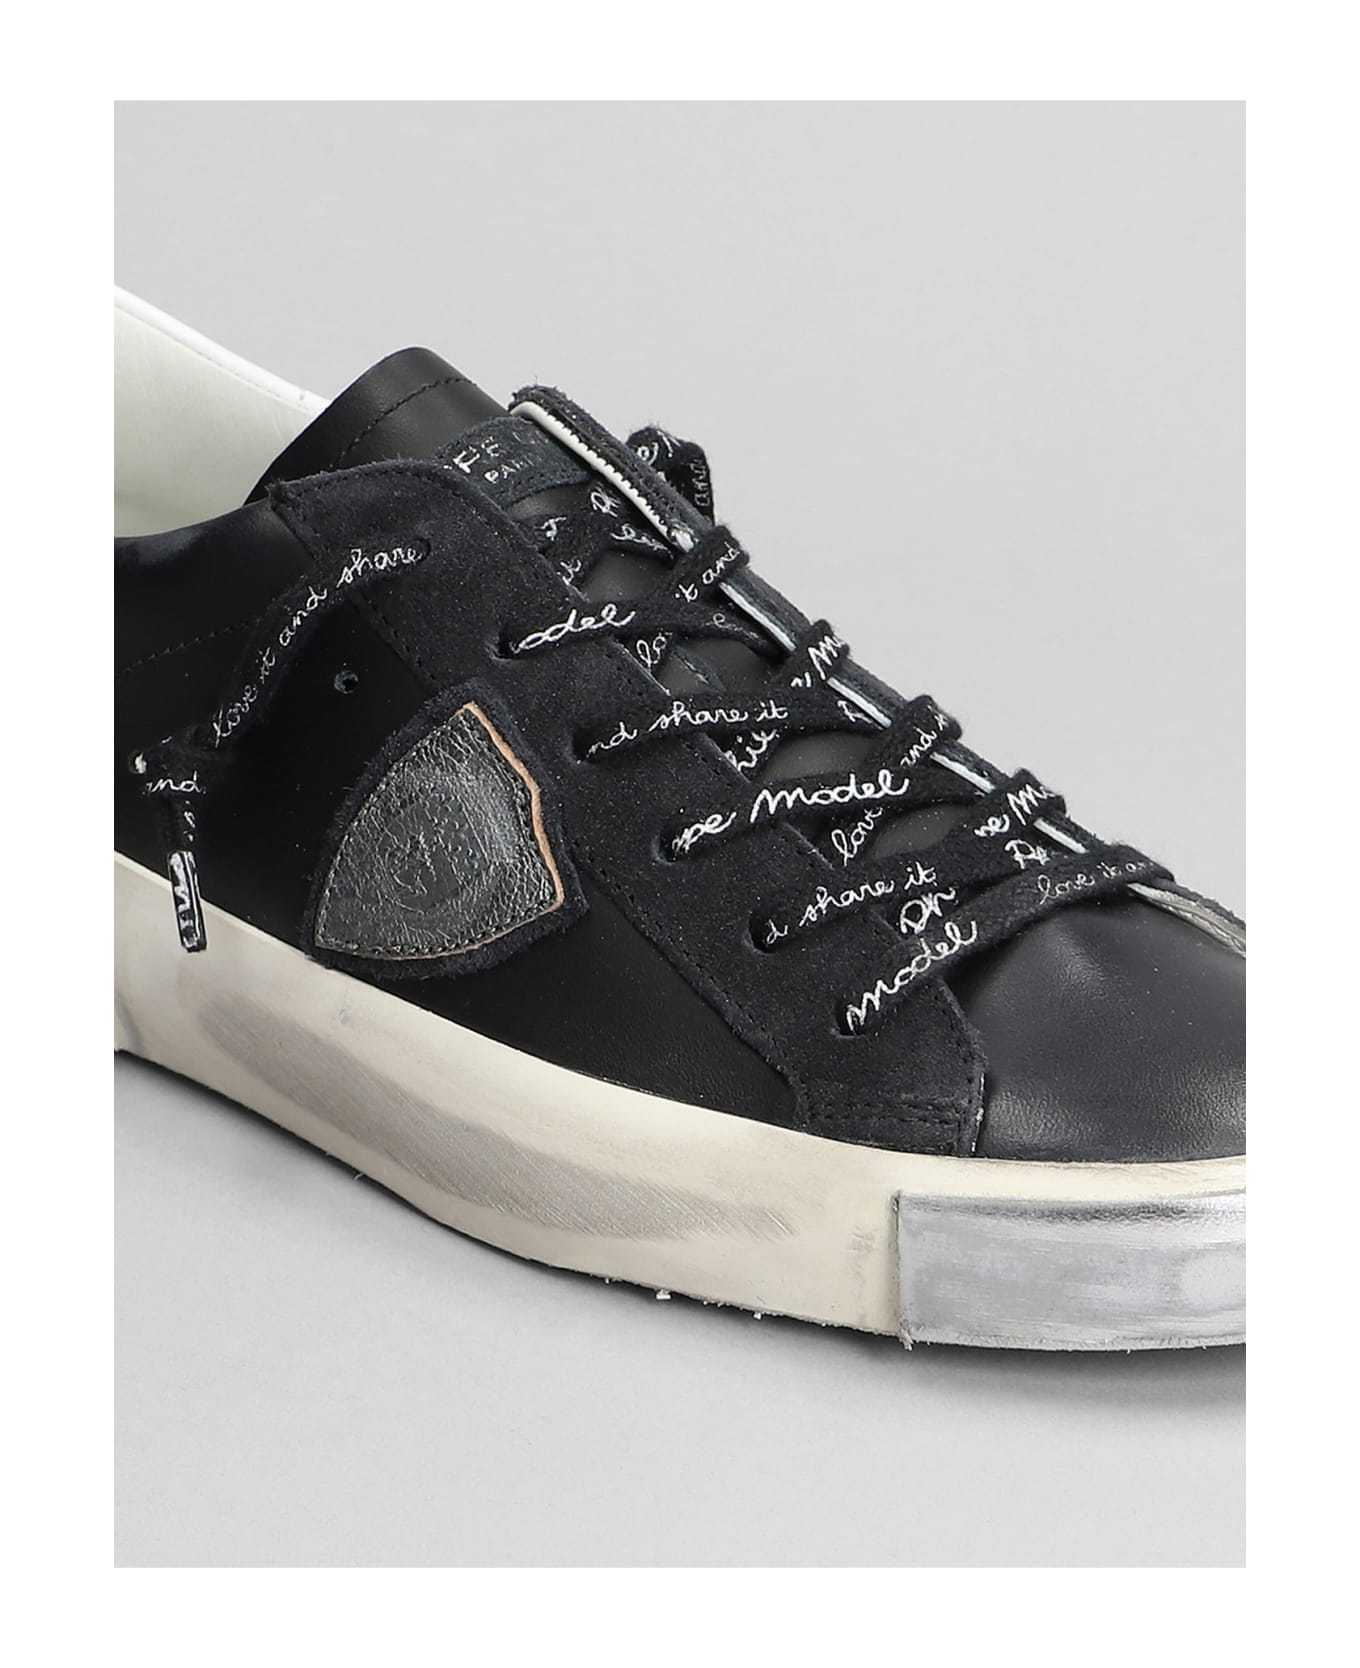 Philippe Model Prsx Low Sneakers In Black Suede And Leather - black